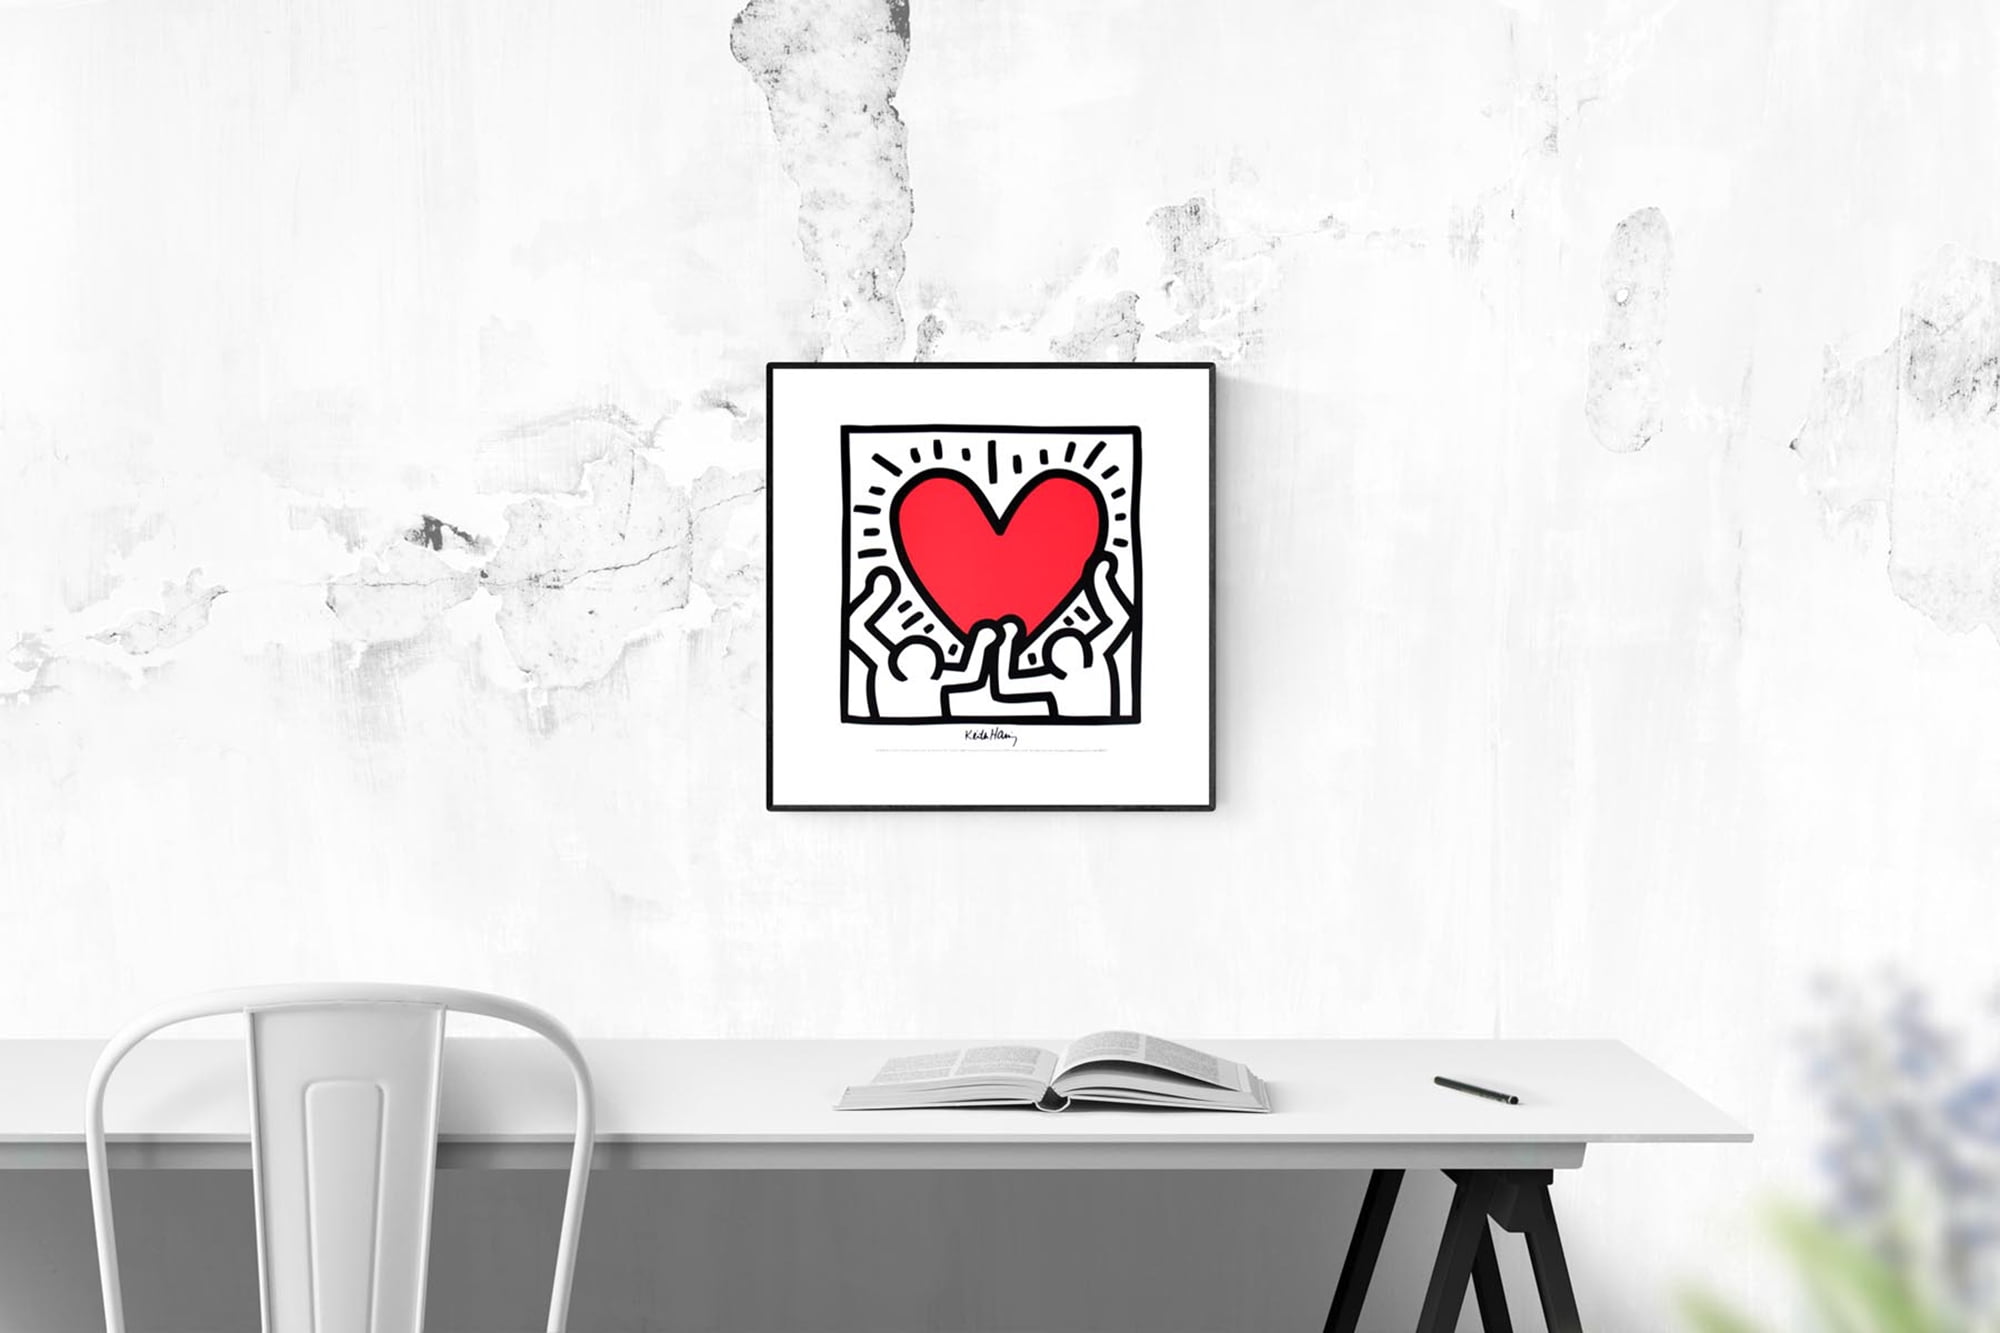 Red 1988 KEITH HARING Untitled 11.75" x 11.75" Poster Pop Art Black & White 